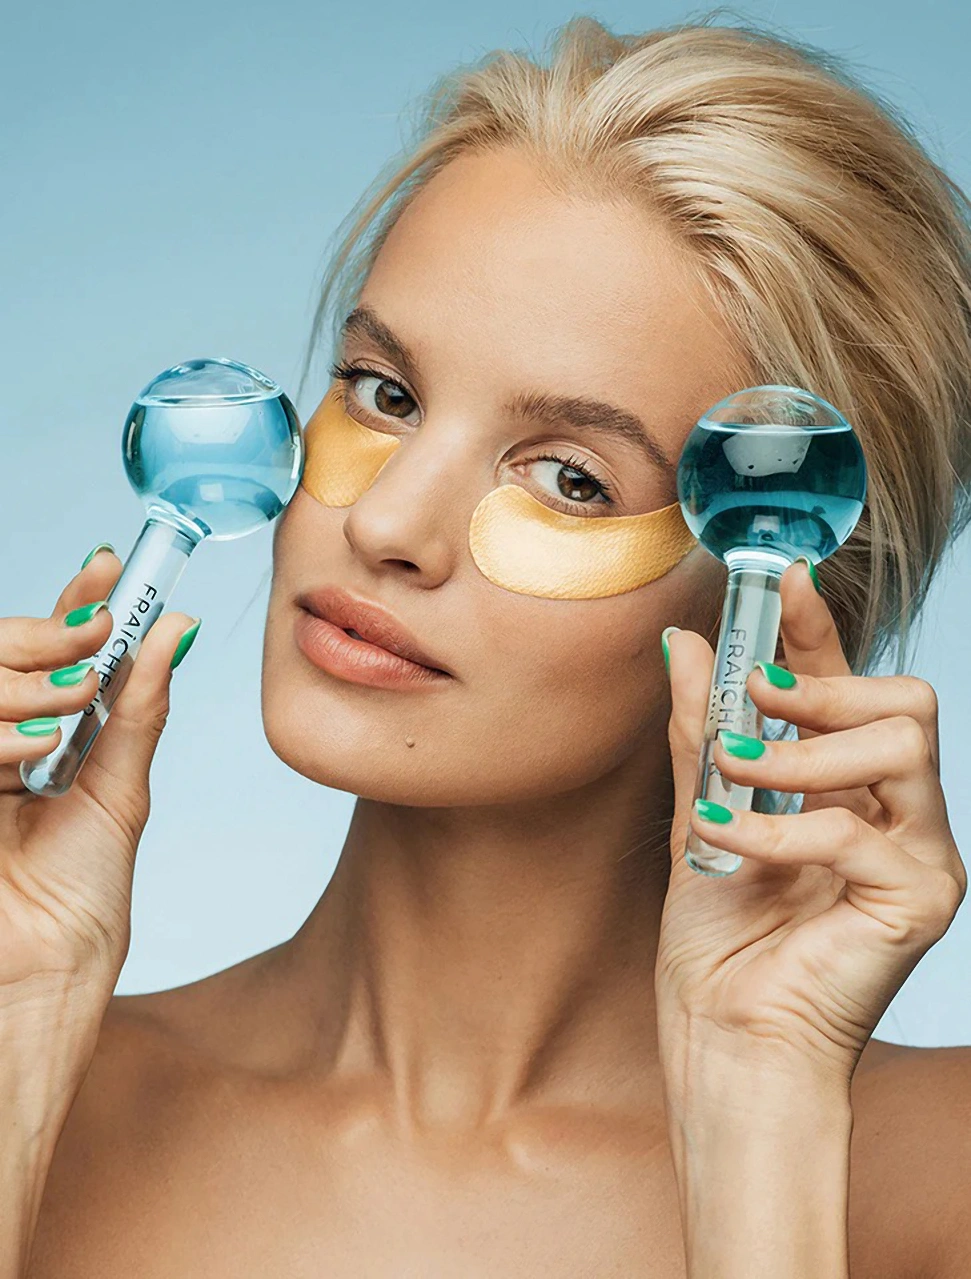 Cryo Beauty: 10 best cryotherapy tools and skincare products